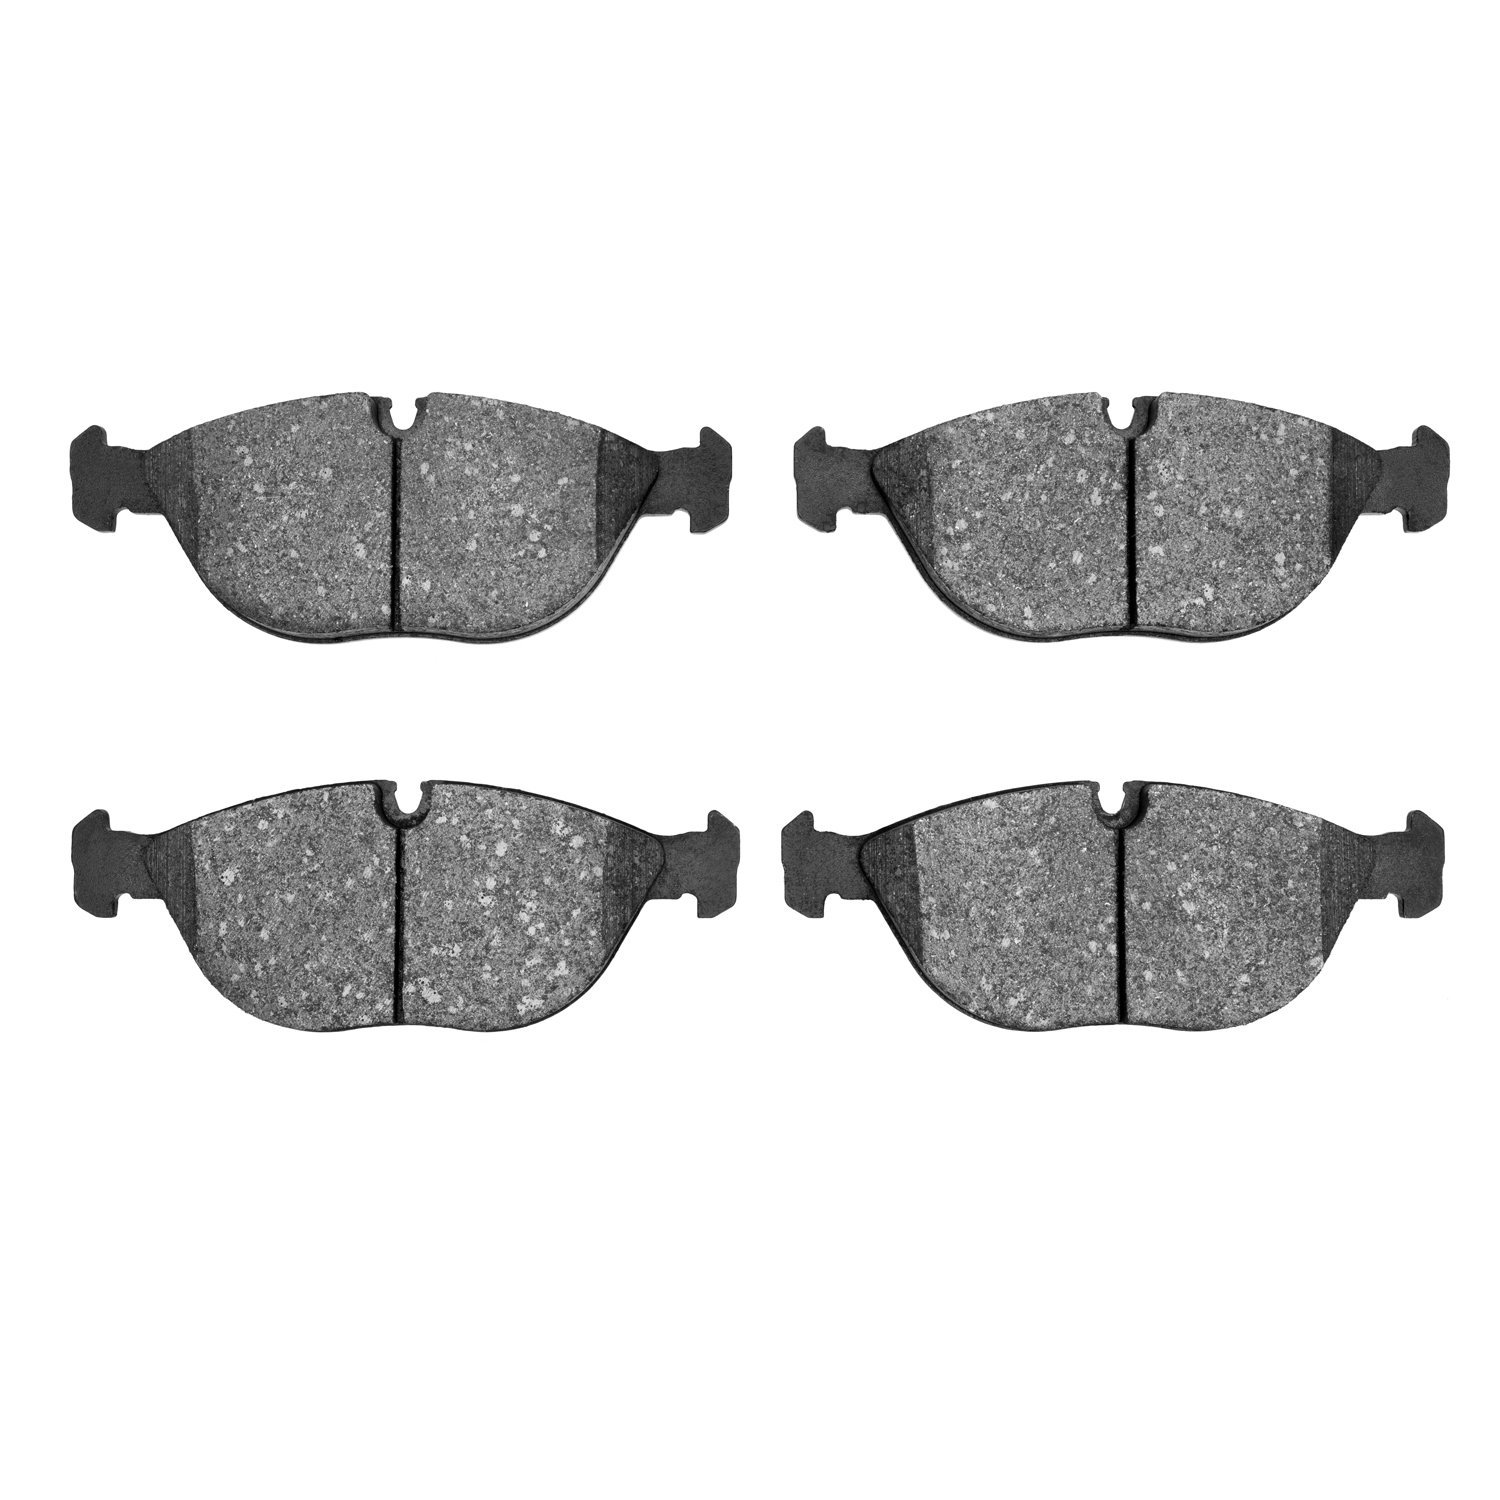 1551-0682-00 5000 Advanced Low-Metallic Brake Pads, 1995-2006 Multiple Makes/Models, Position: Front